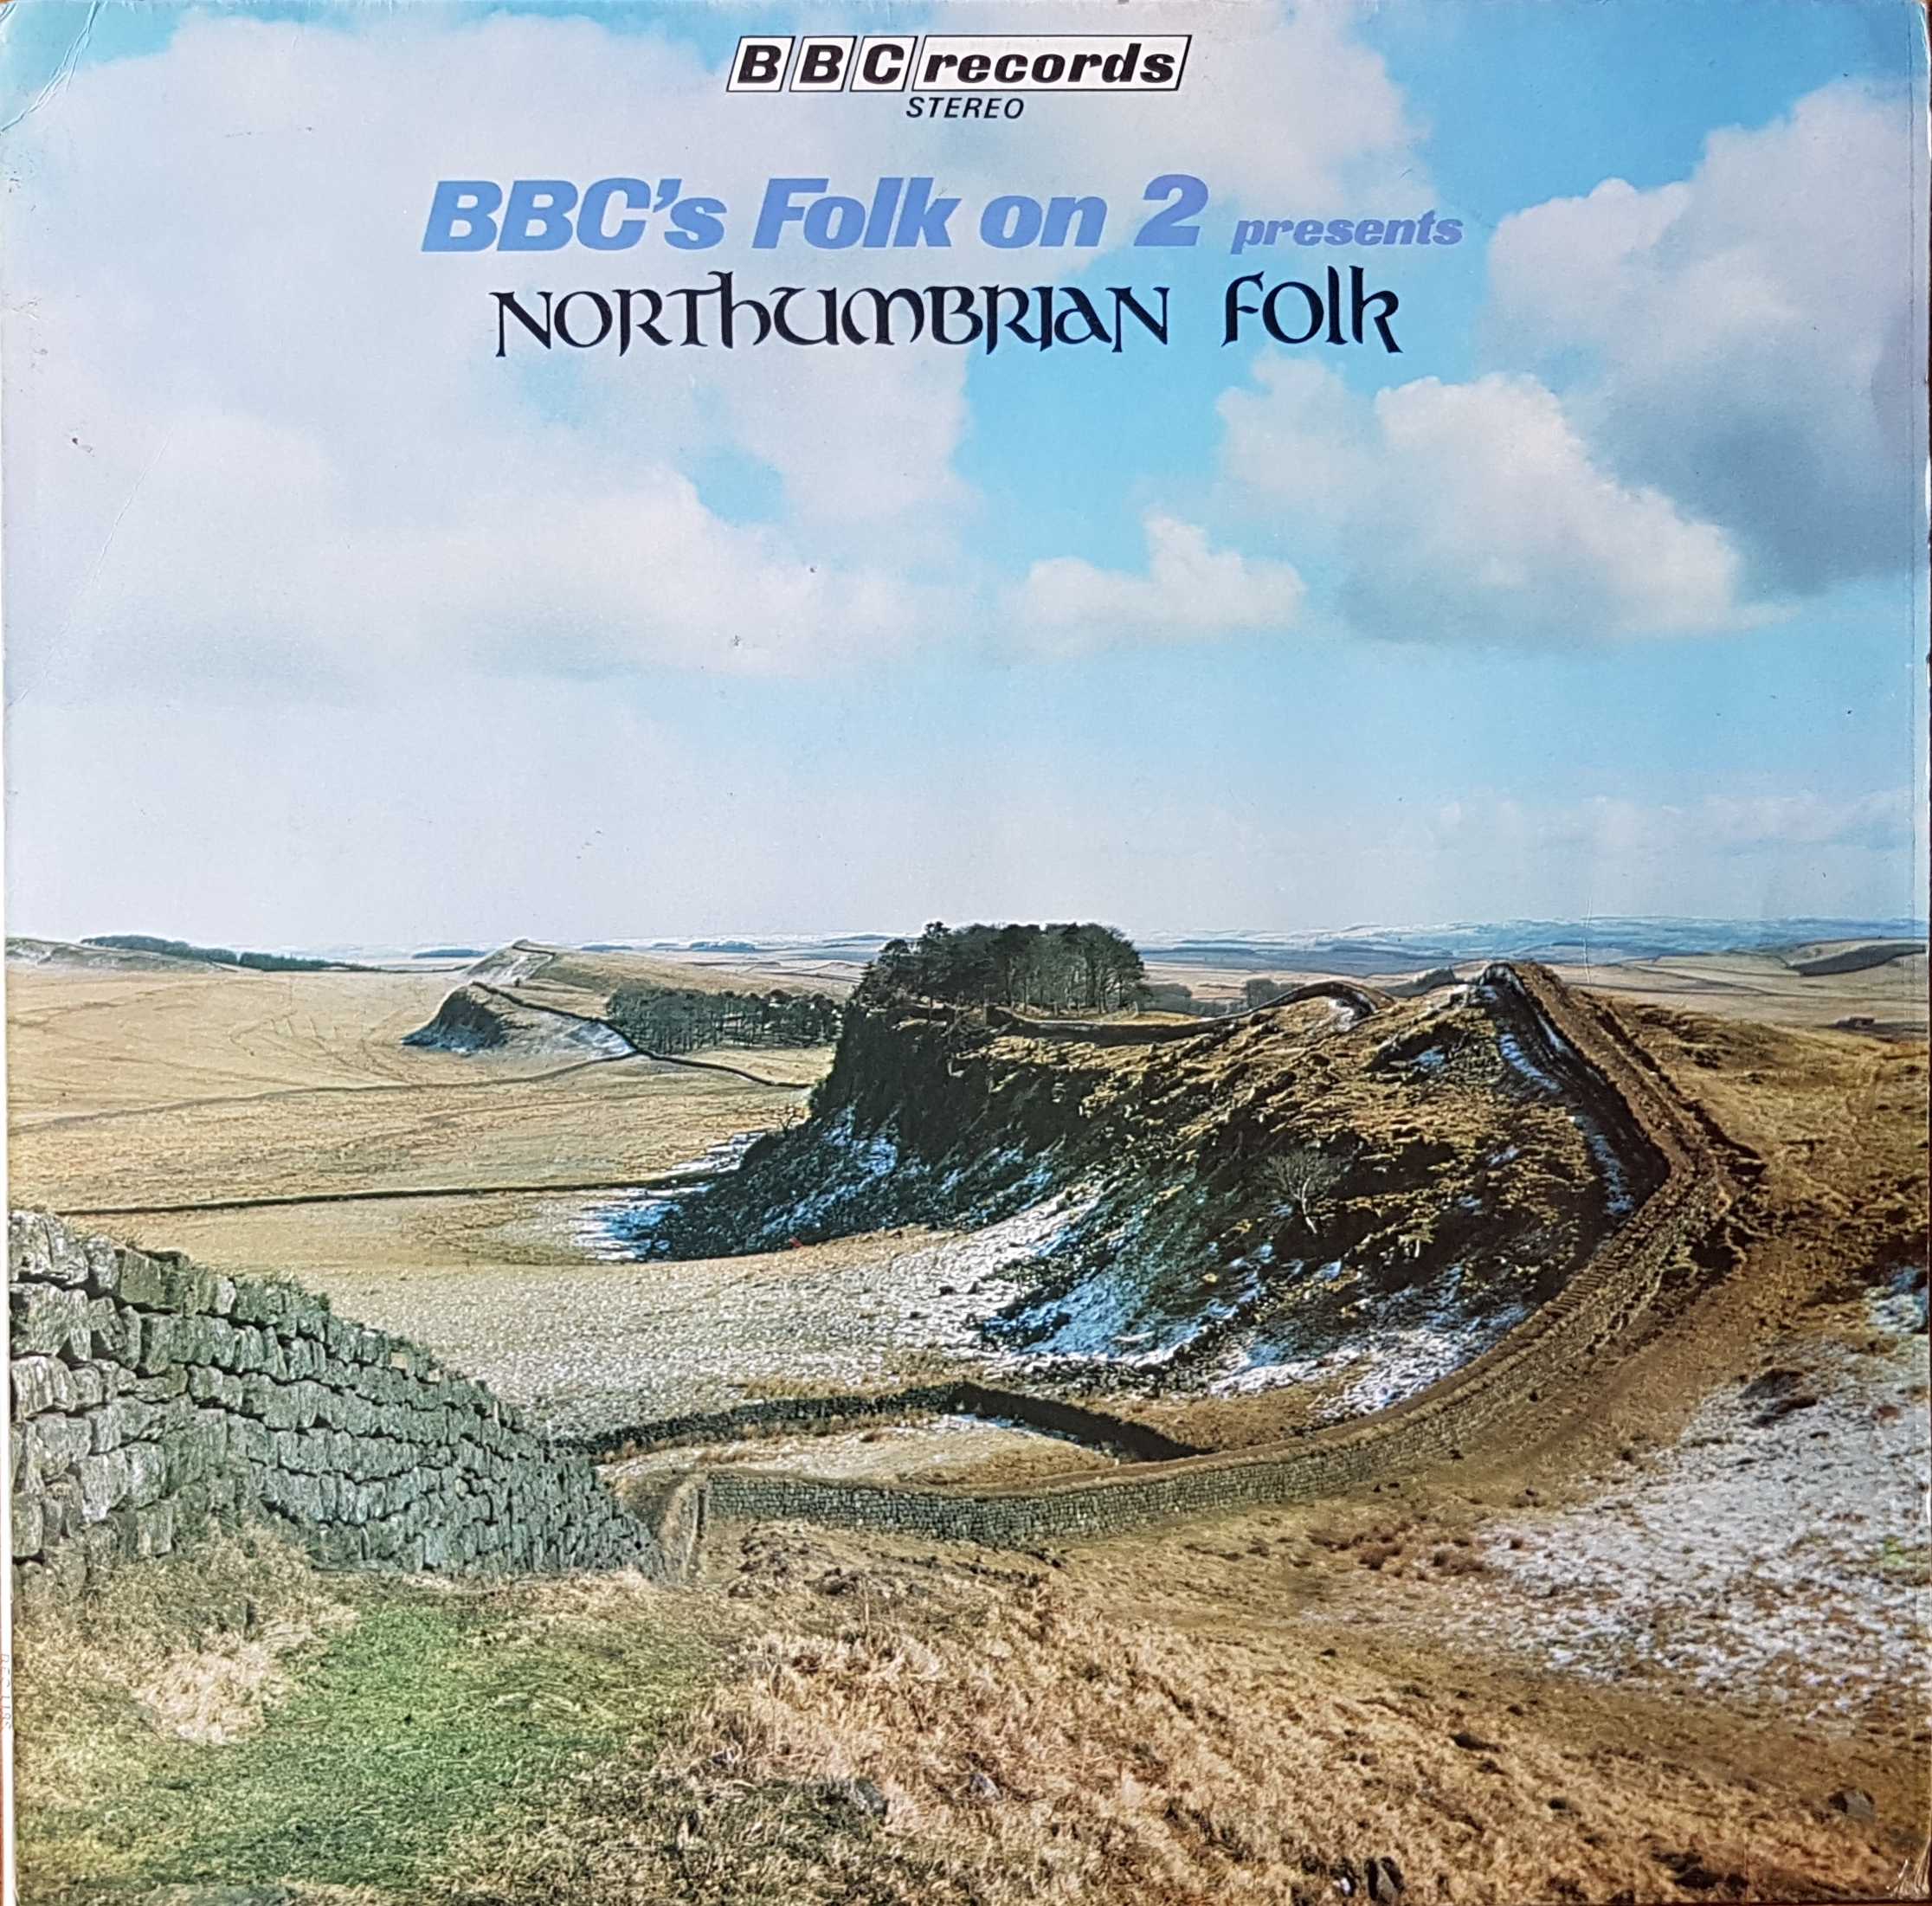 Picture of REC 118 BBC's folk on 2 - Northumbrian folk by artist Various from the BBC albums - Records and Tapes library